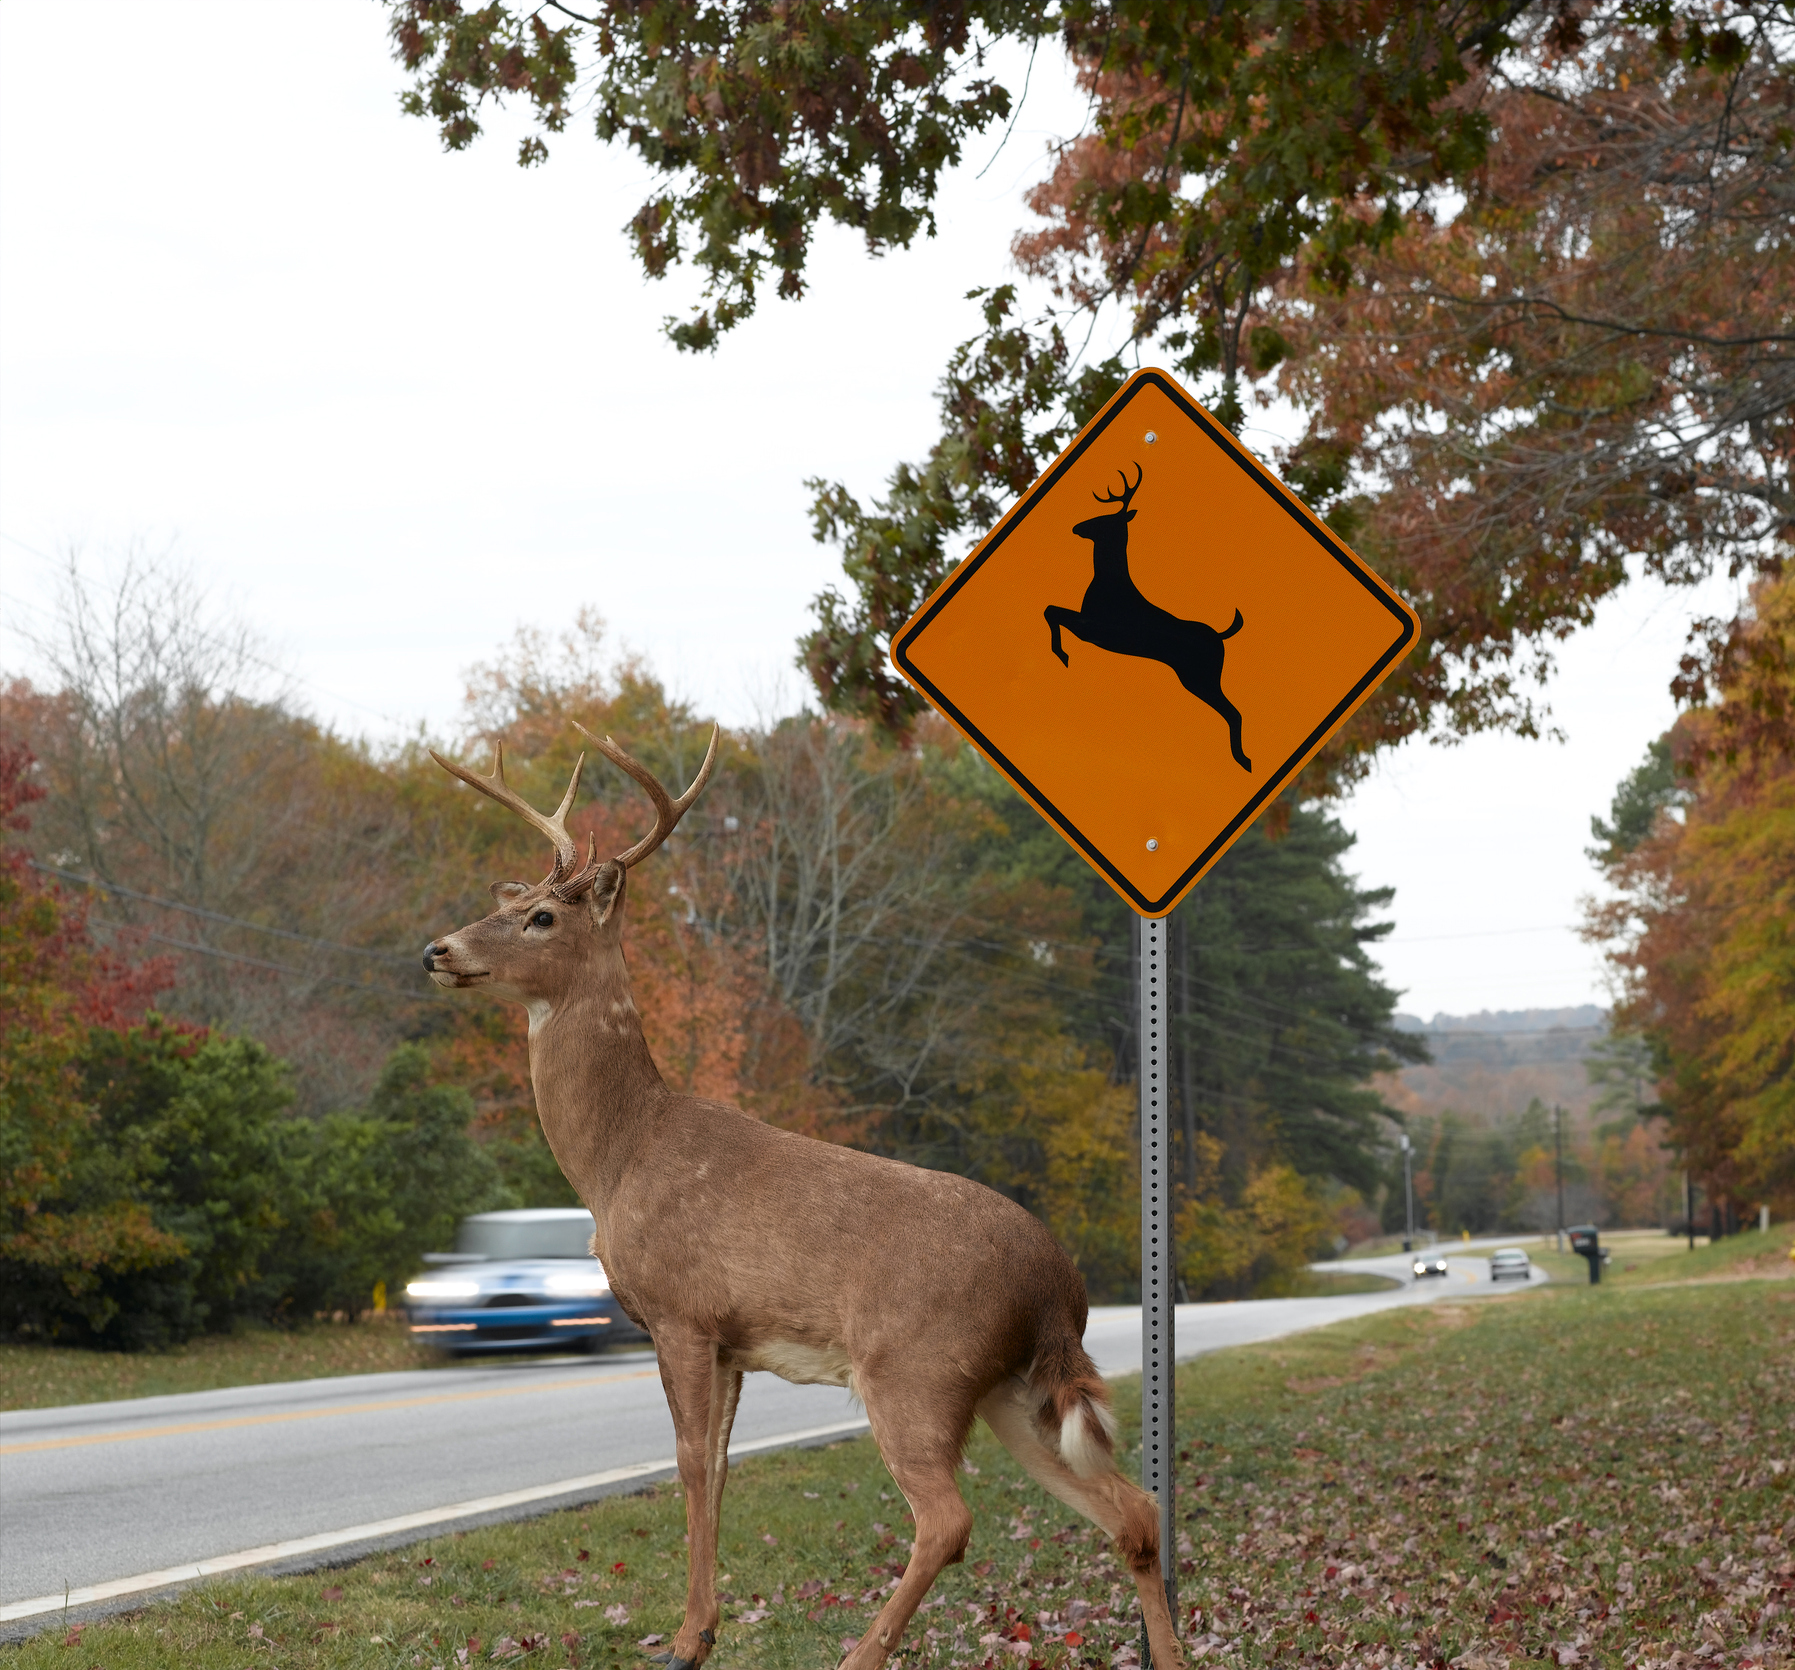 A deer about to cross the highway.